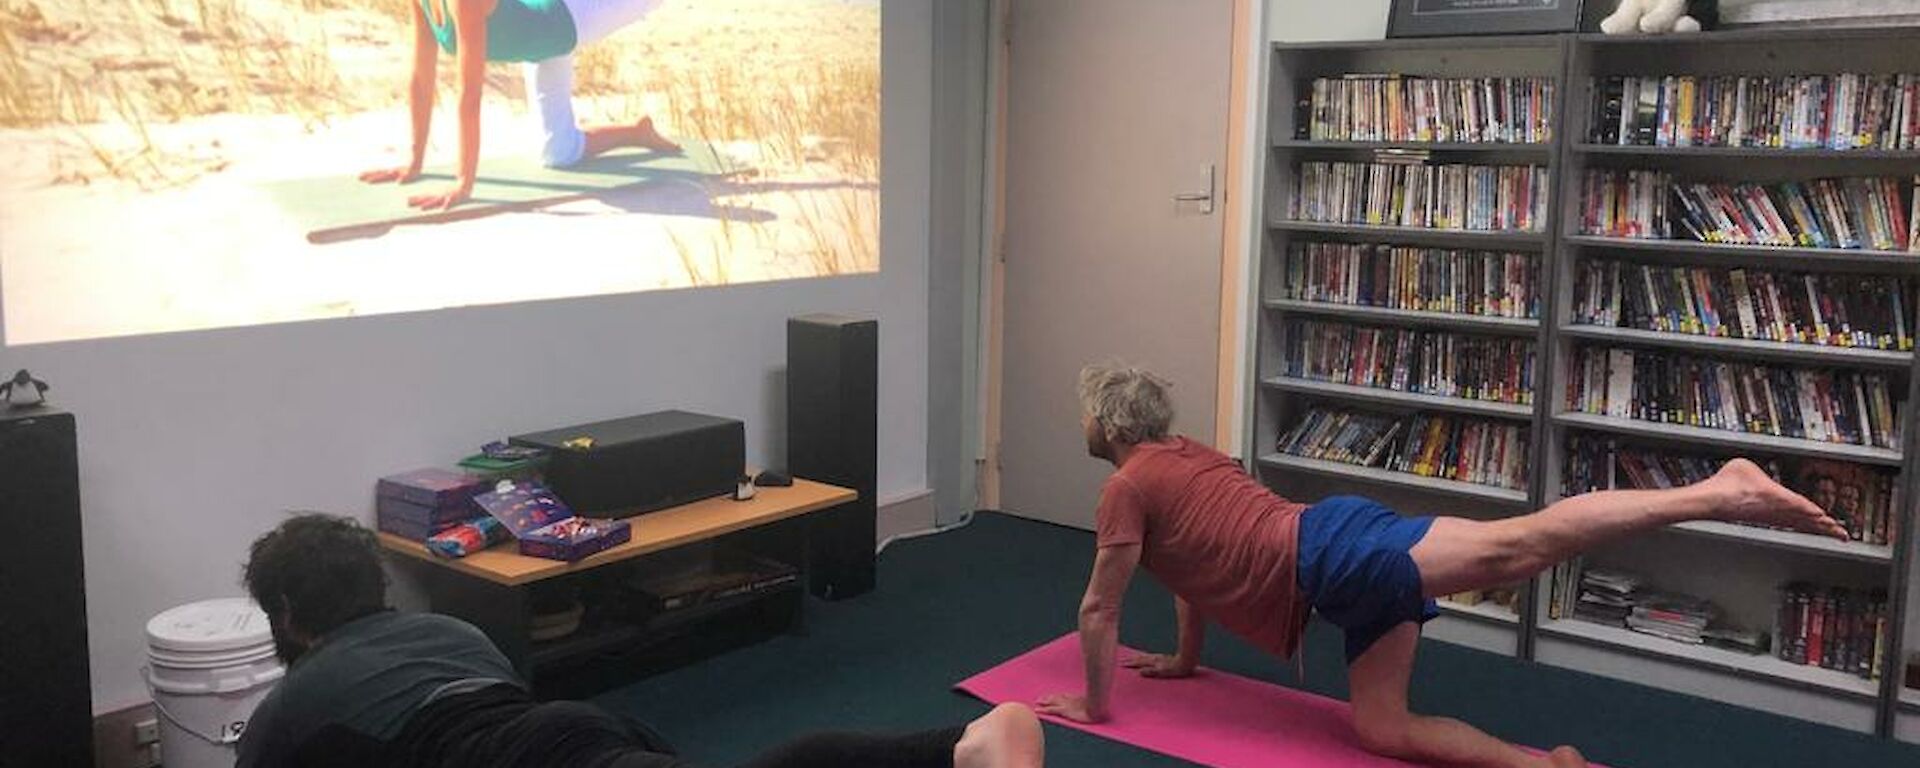 Two expedioners on yoga mats watching a yoga tutorial on screen and replicating the pose